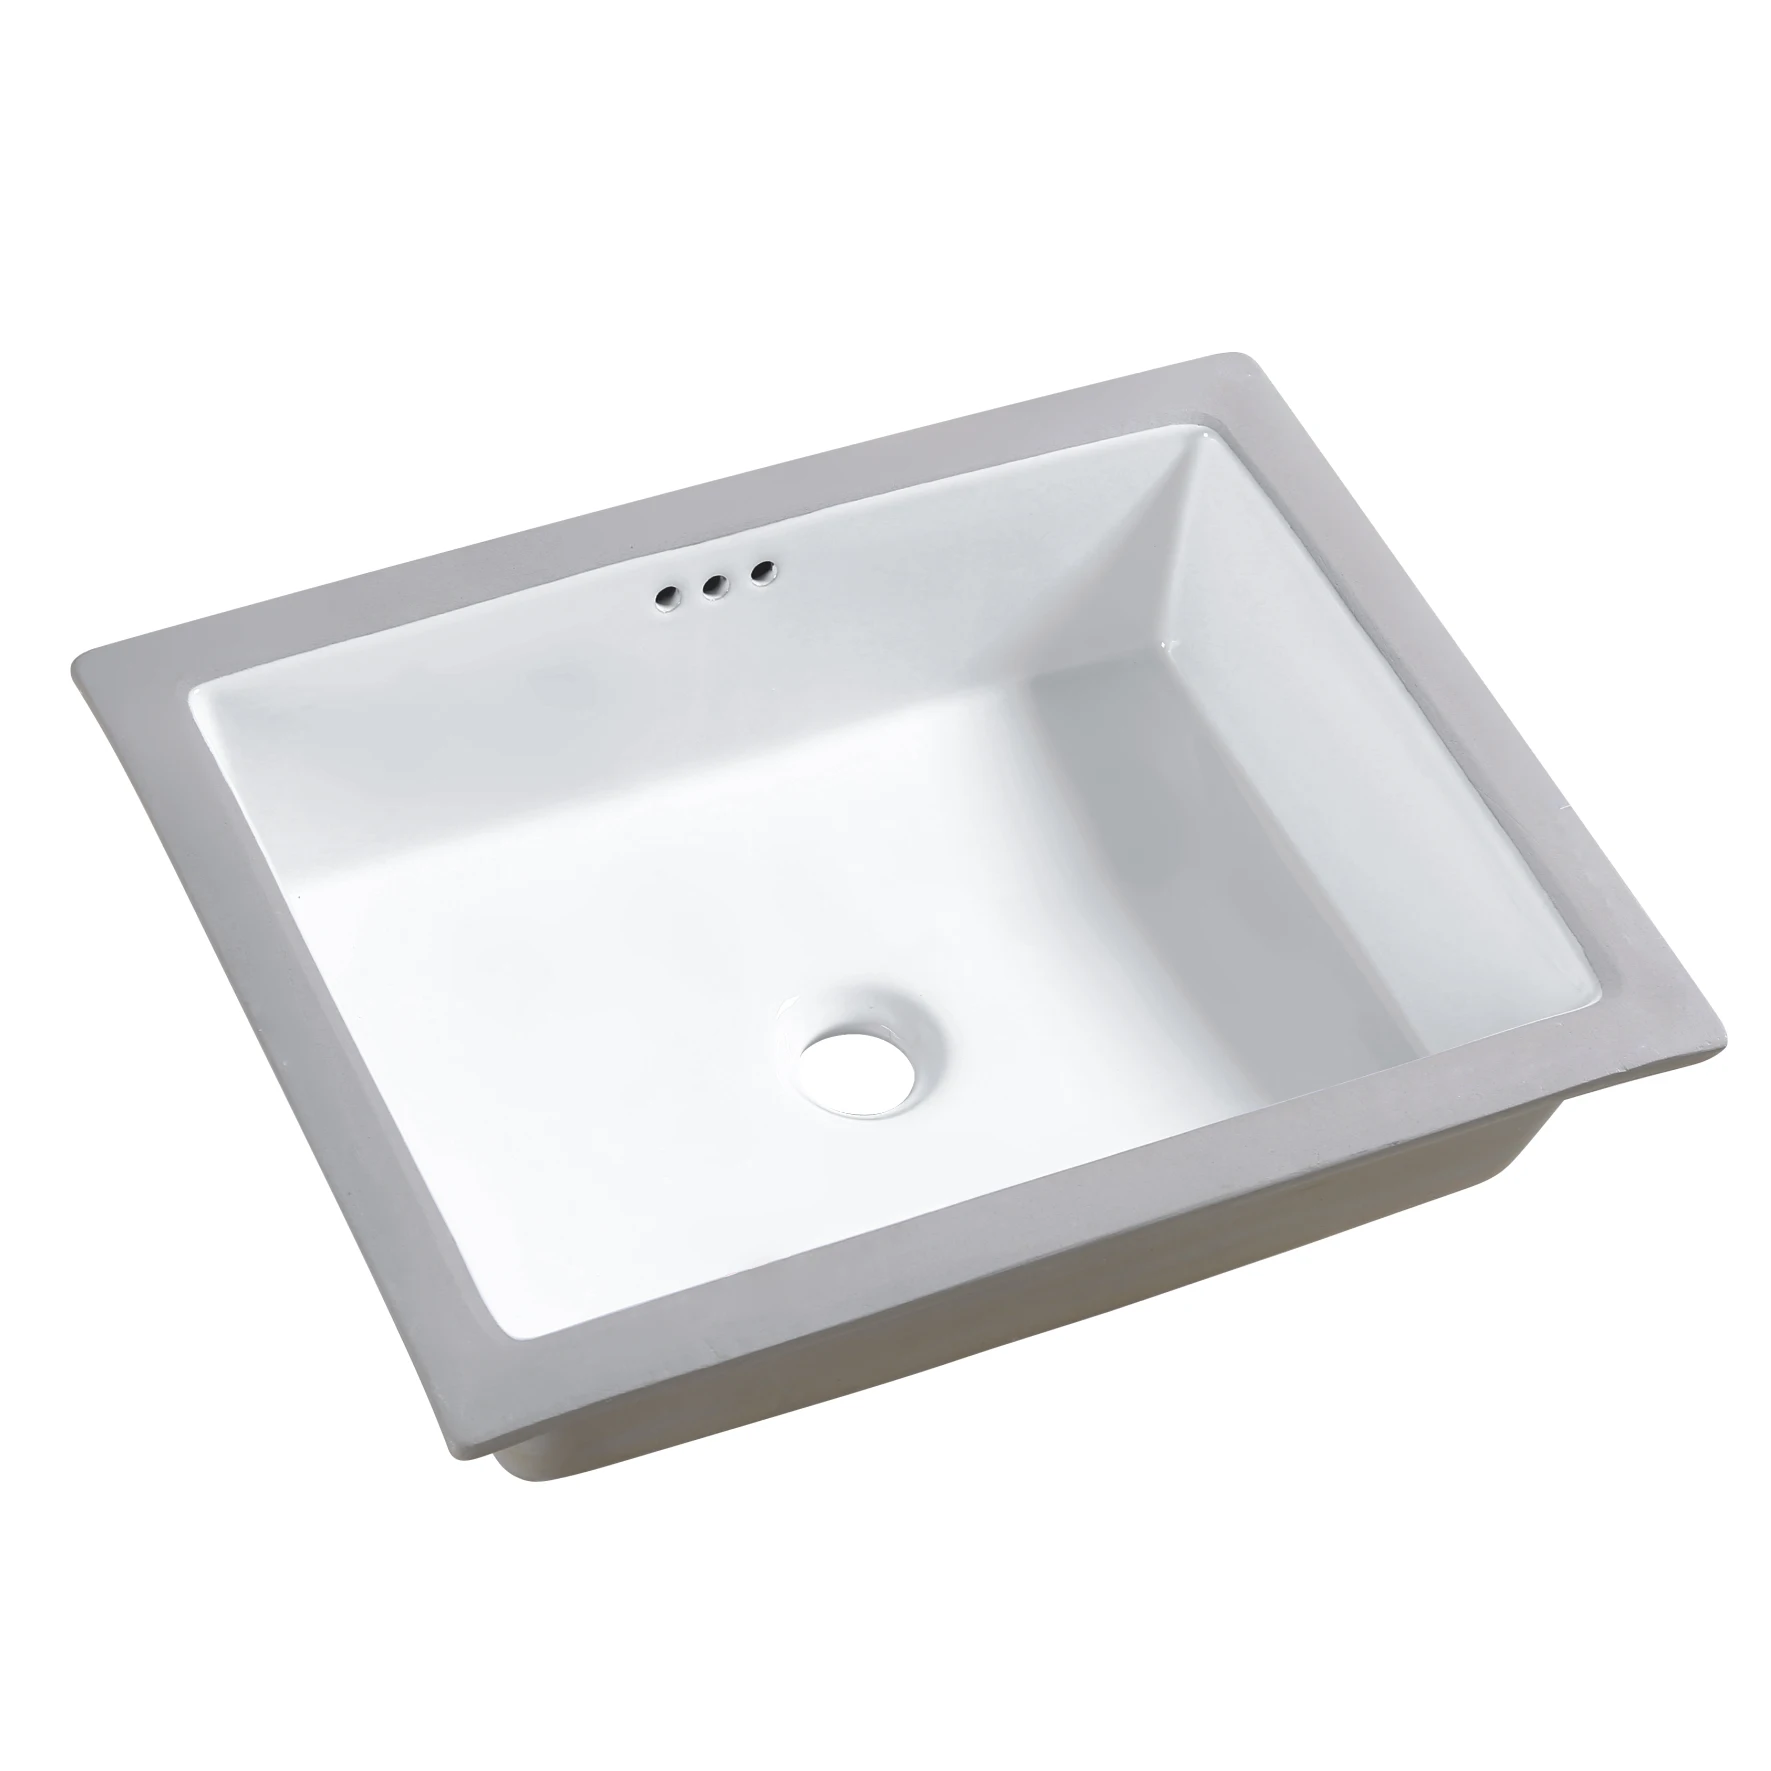 Low price graphic design office building hospital rectangular under counter basin